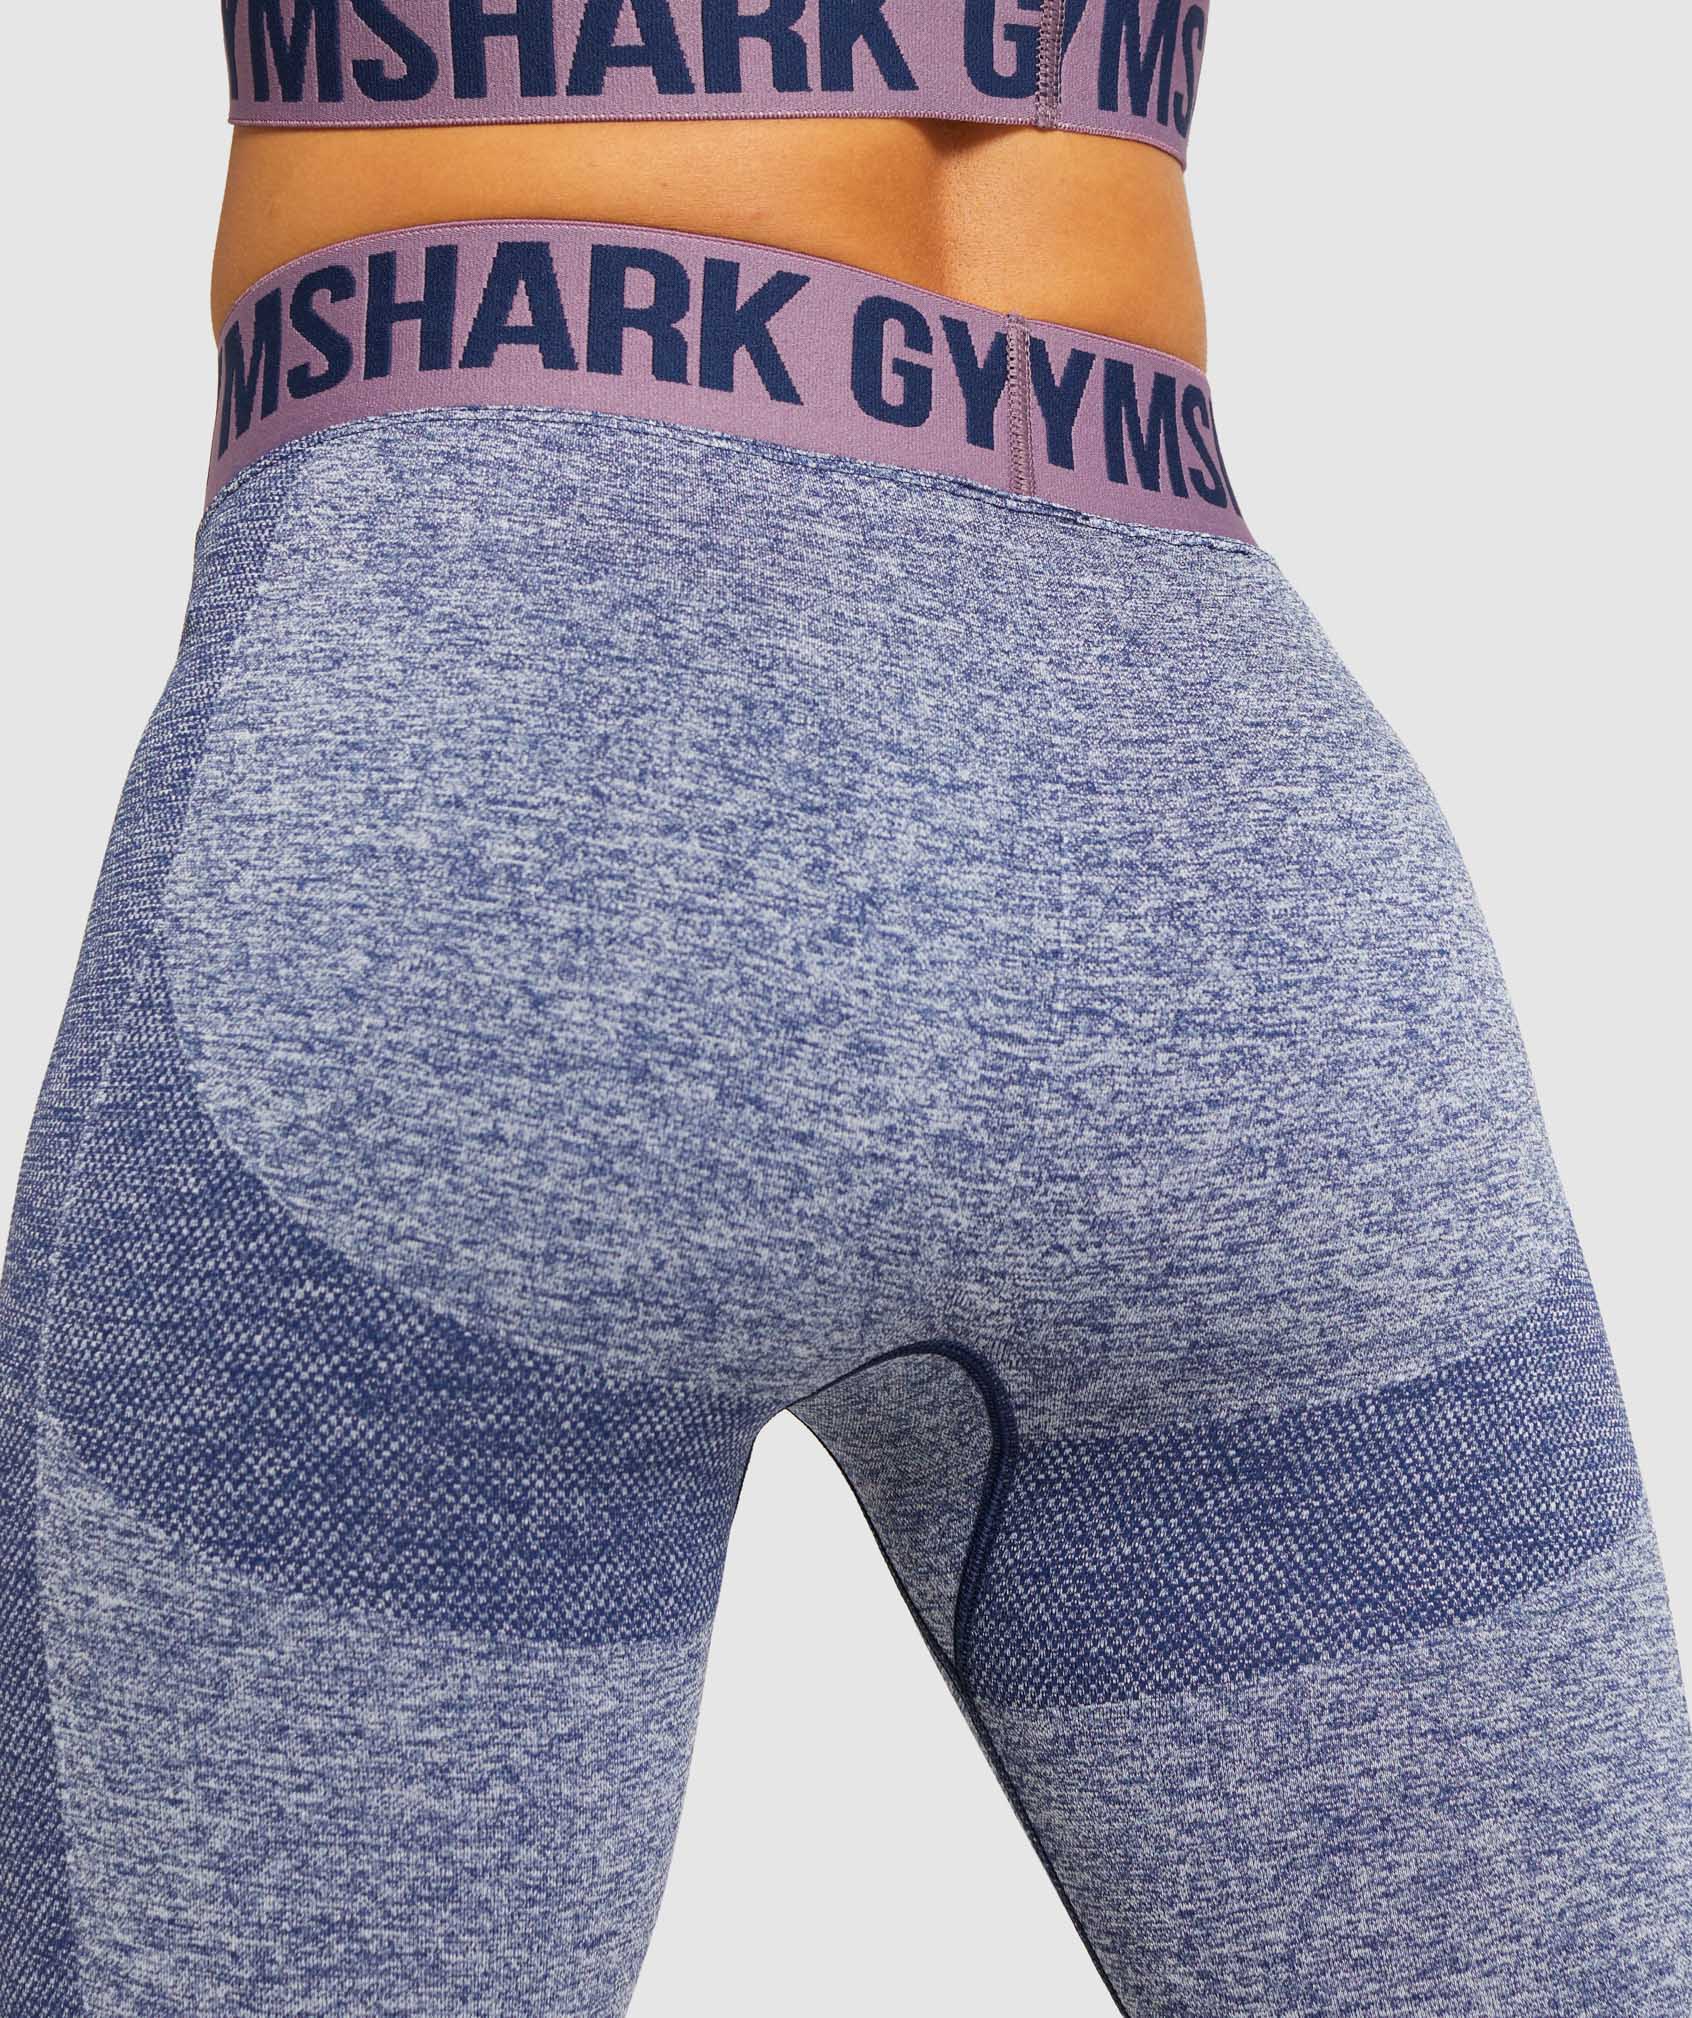 Gymshark Flex Legging & Sport Bra Multiple - $72 (15% Off Retail) New With  Tags - From Yoselin